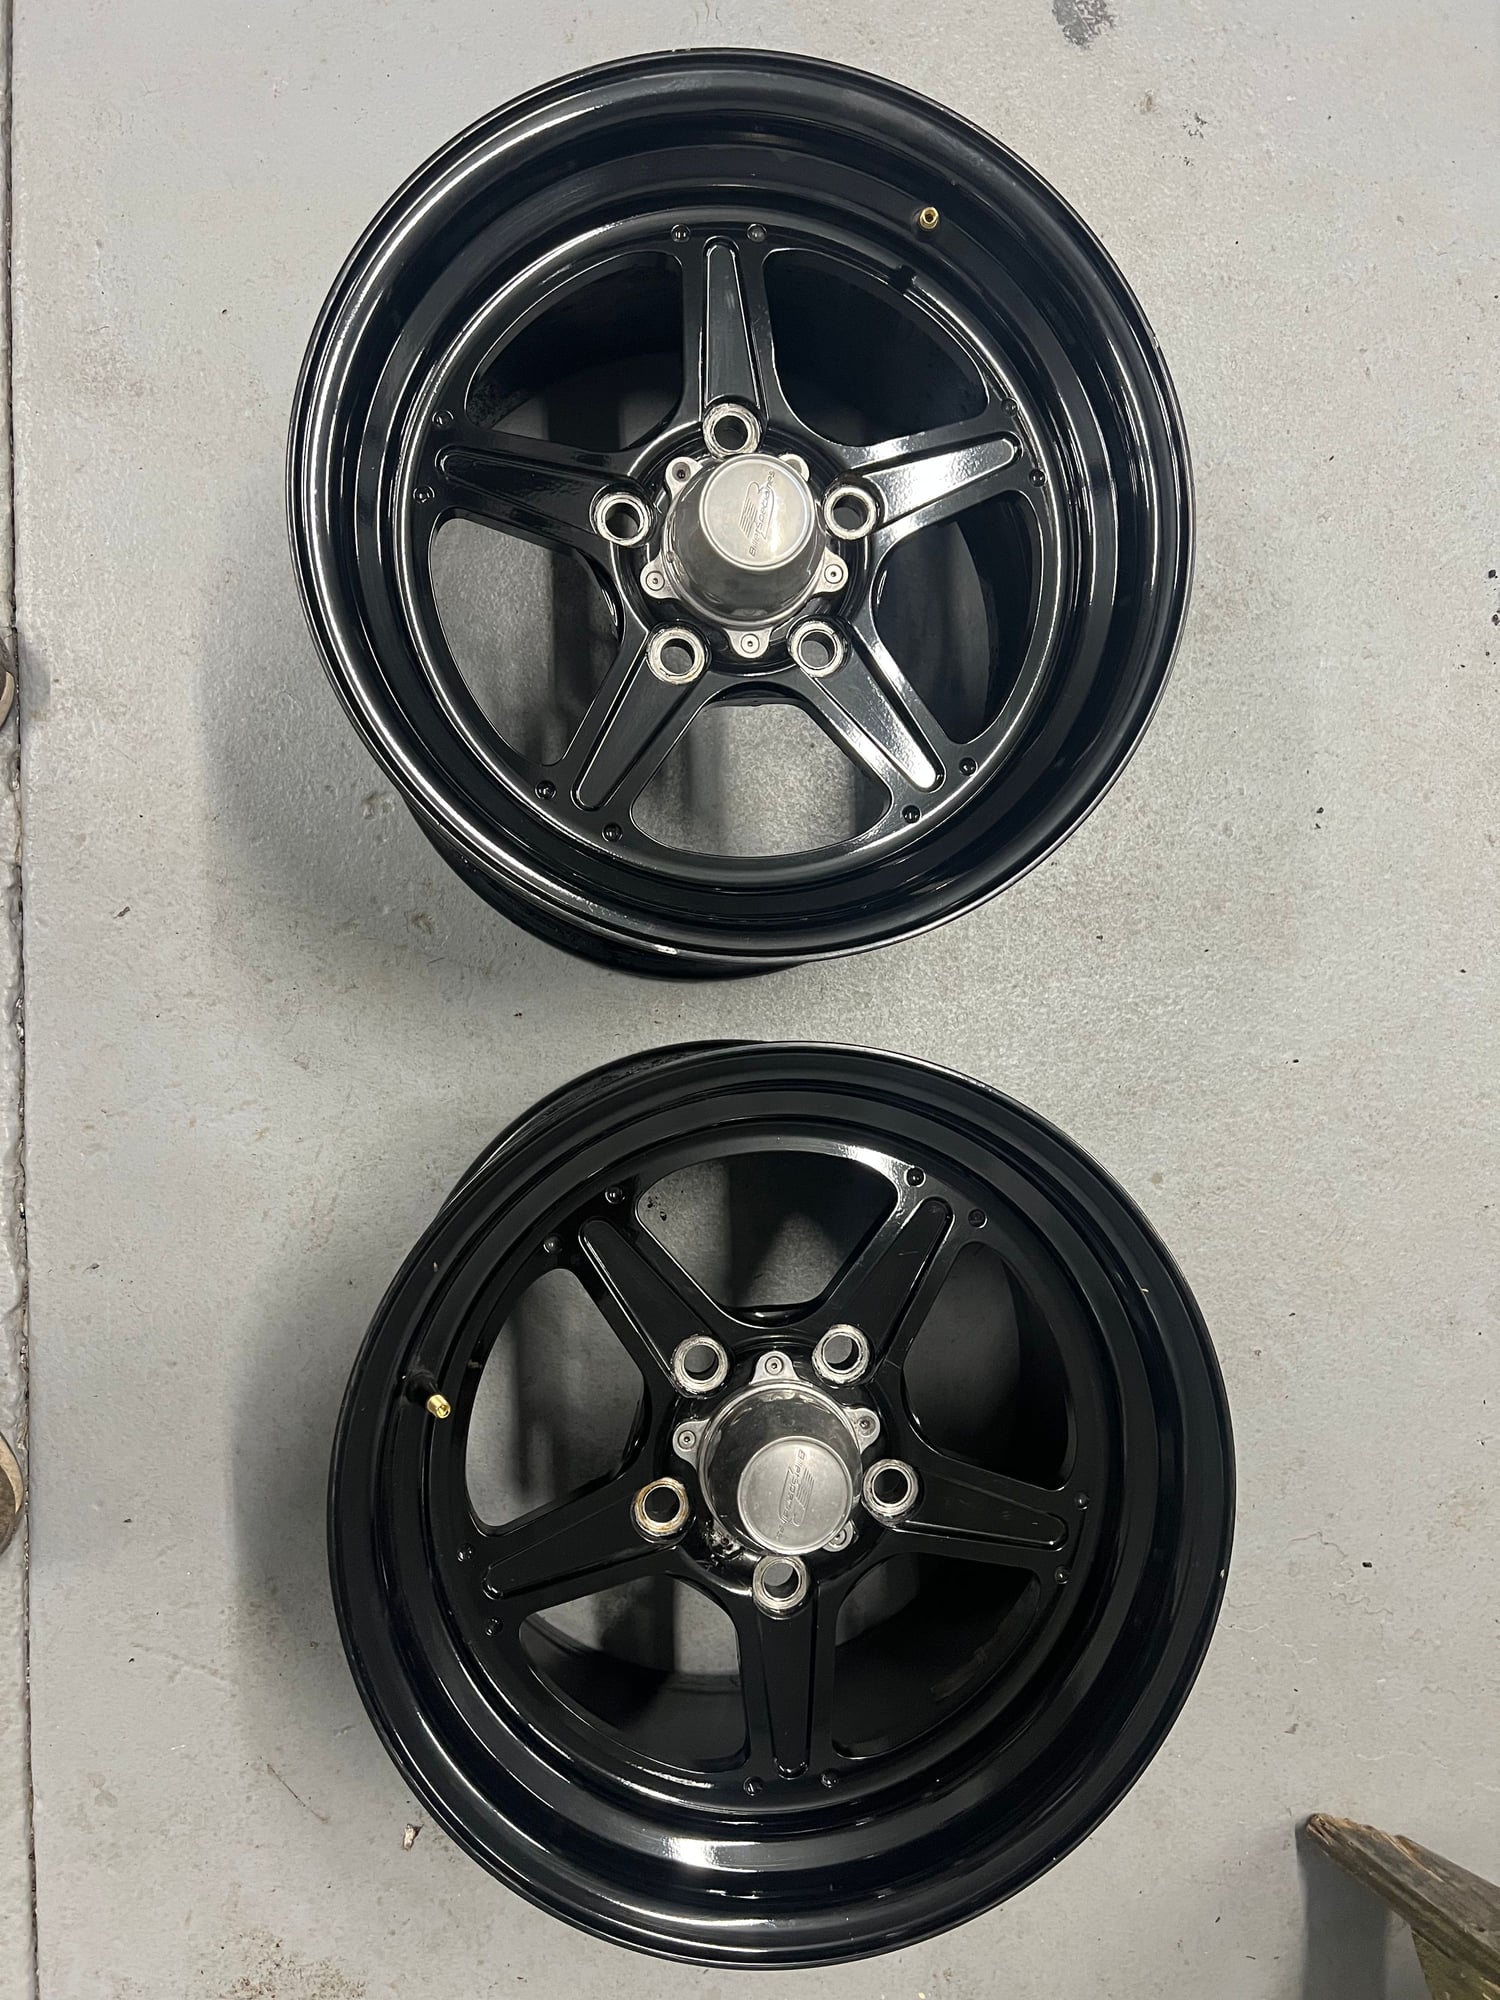 Wheels and Tires/Axles - Billet specialties rear fbody specific wheels - Used - 1998 to 2002 Chevrolet Camaro - Moultrie, GA 31768, United States